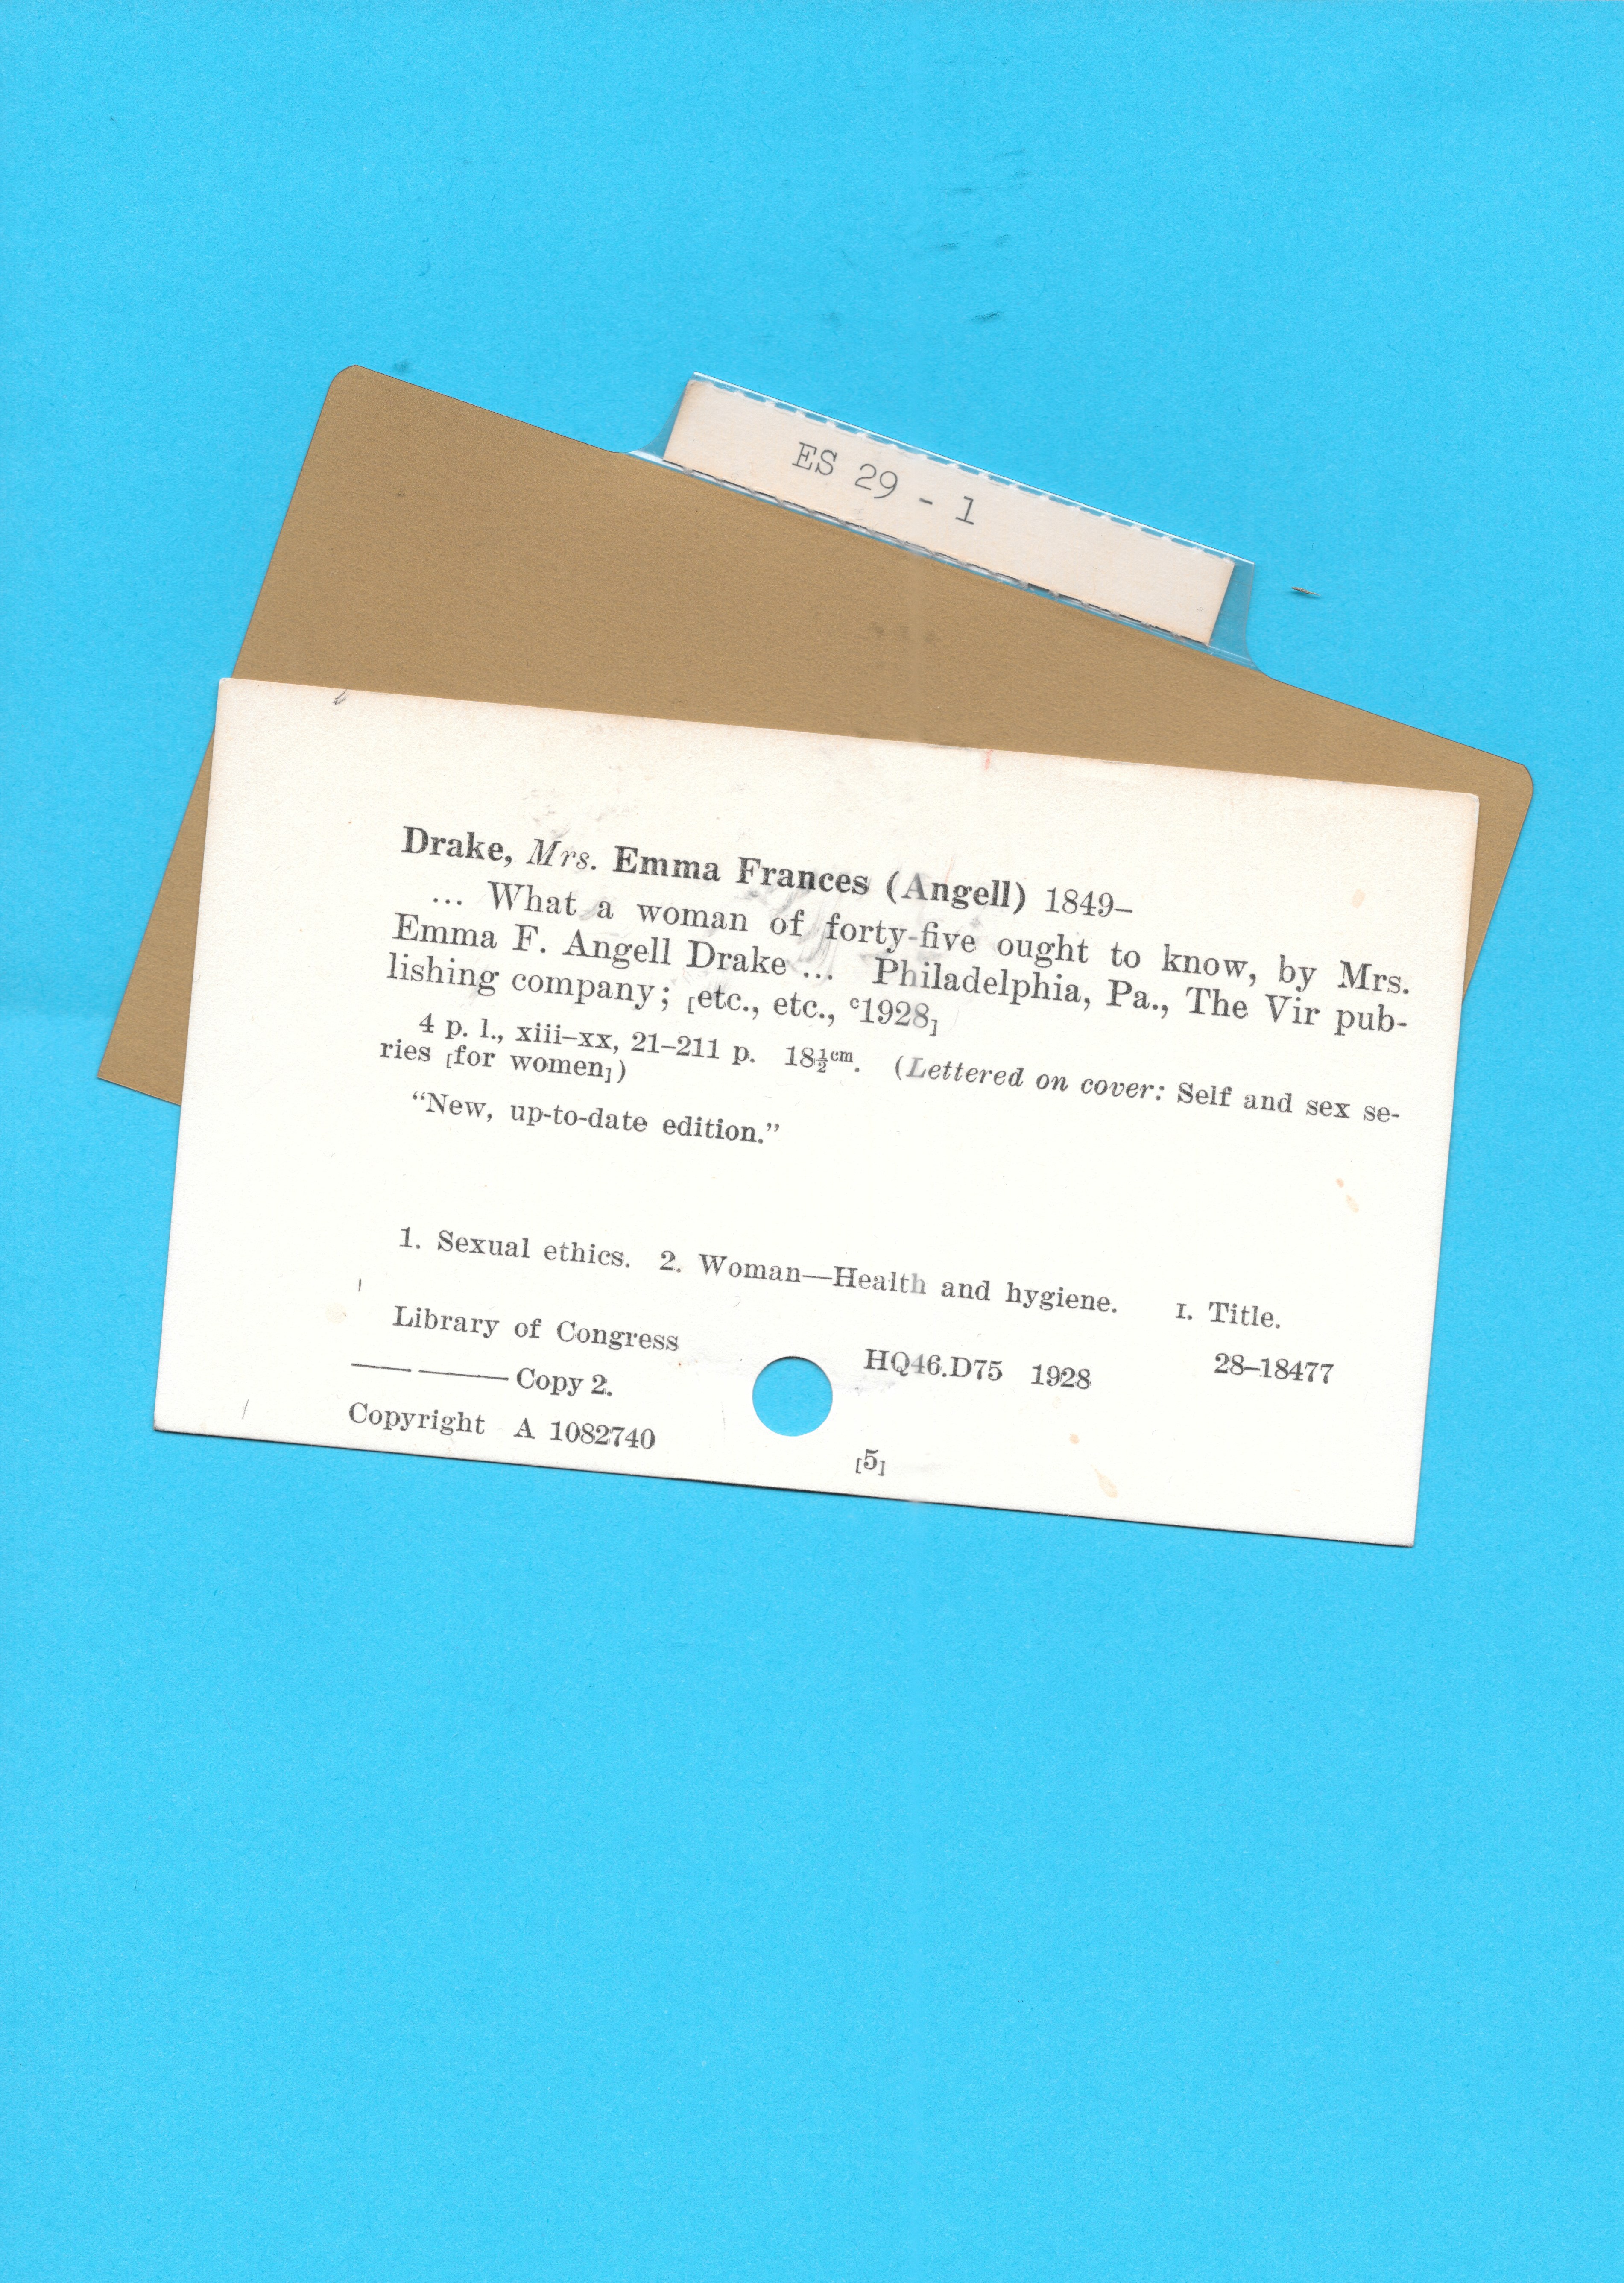 Photo of library cards over blue background taken by the author